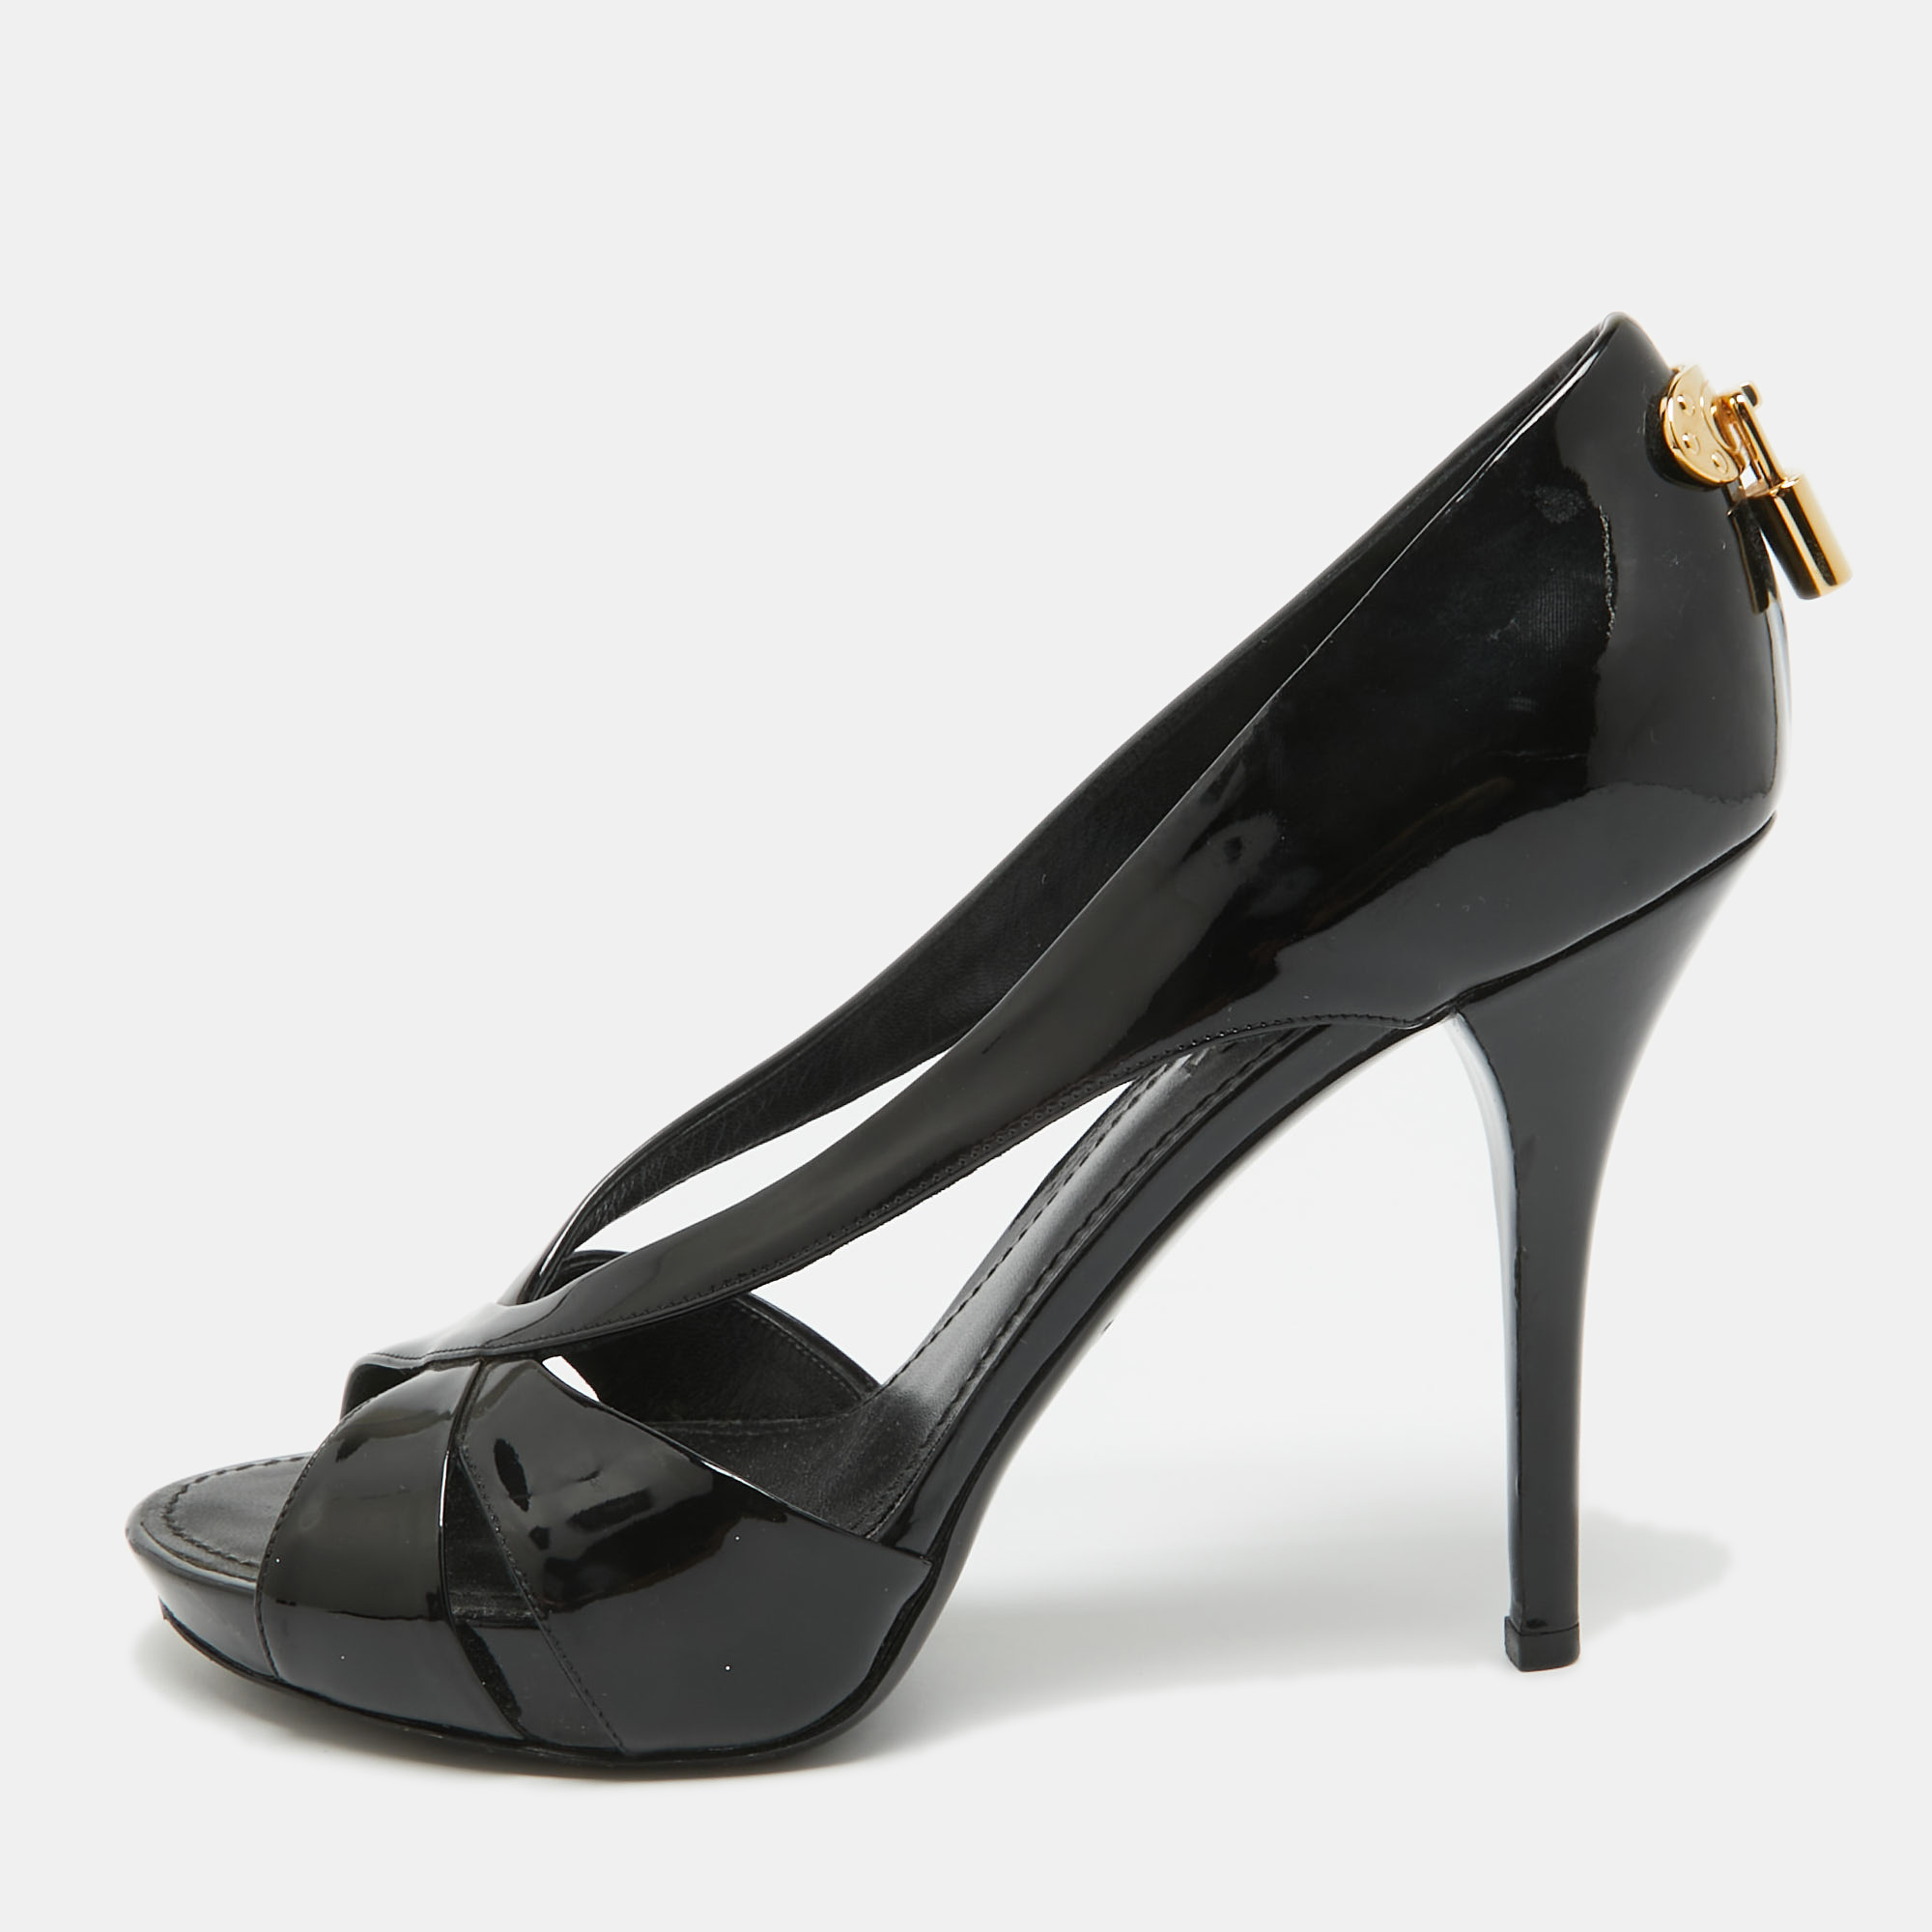 Classy gorgeous and chic these pumps will certainly be worth adding to your collection. They are made from quality materials and are set on tall slender heels. Style them with your fitted dresses or trousers.